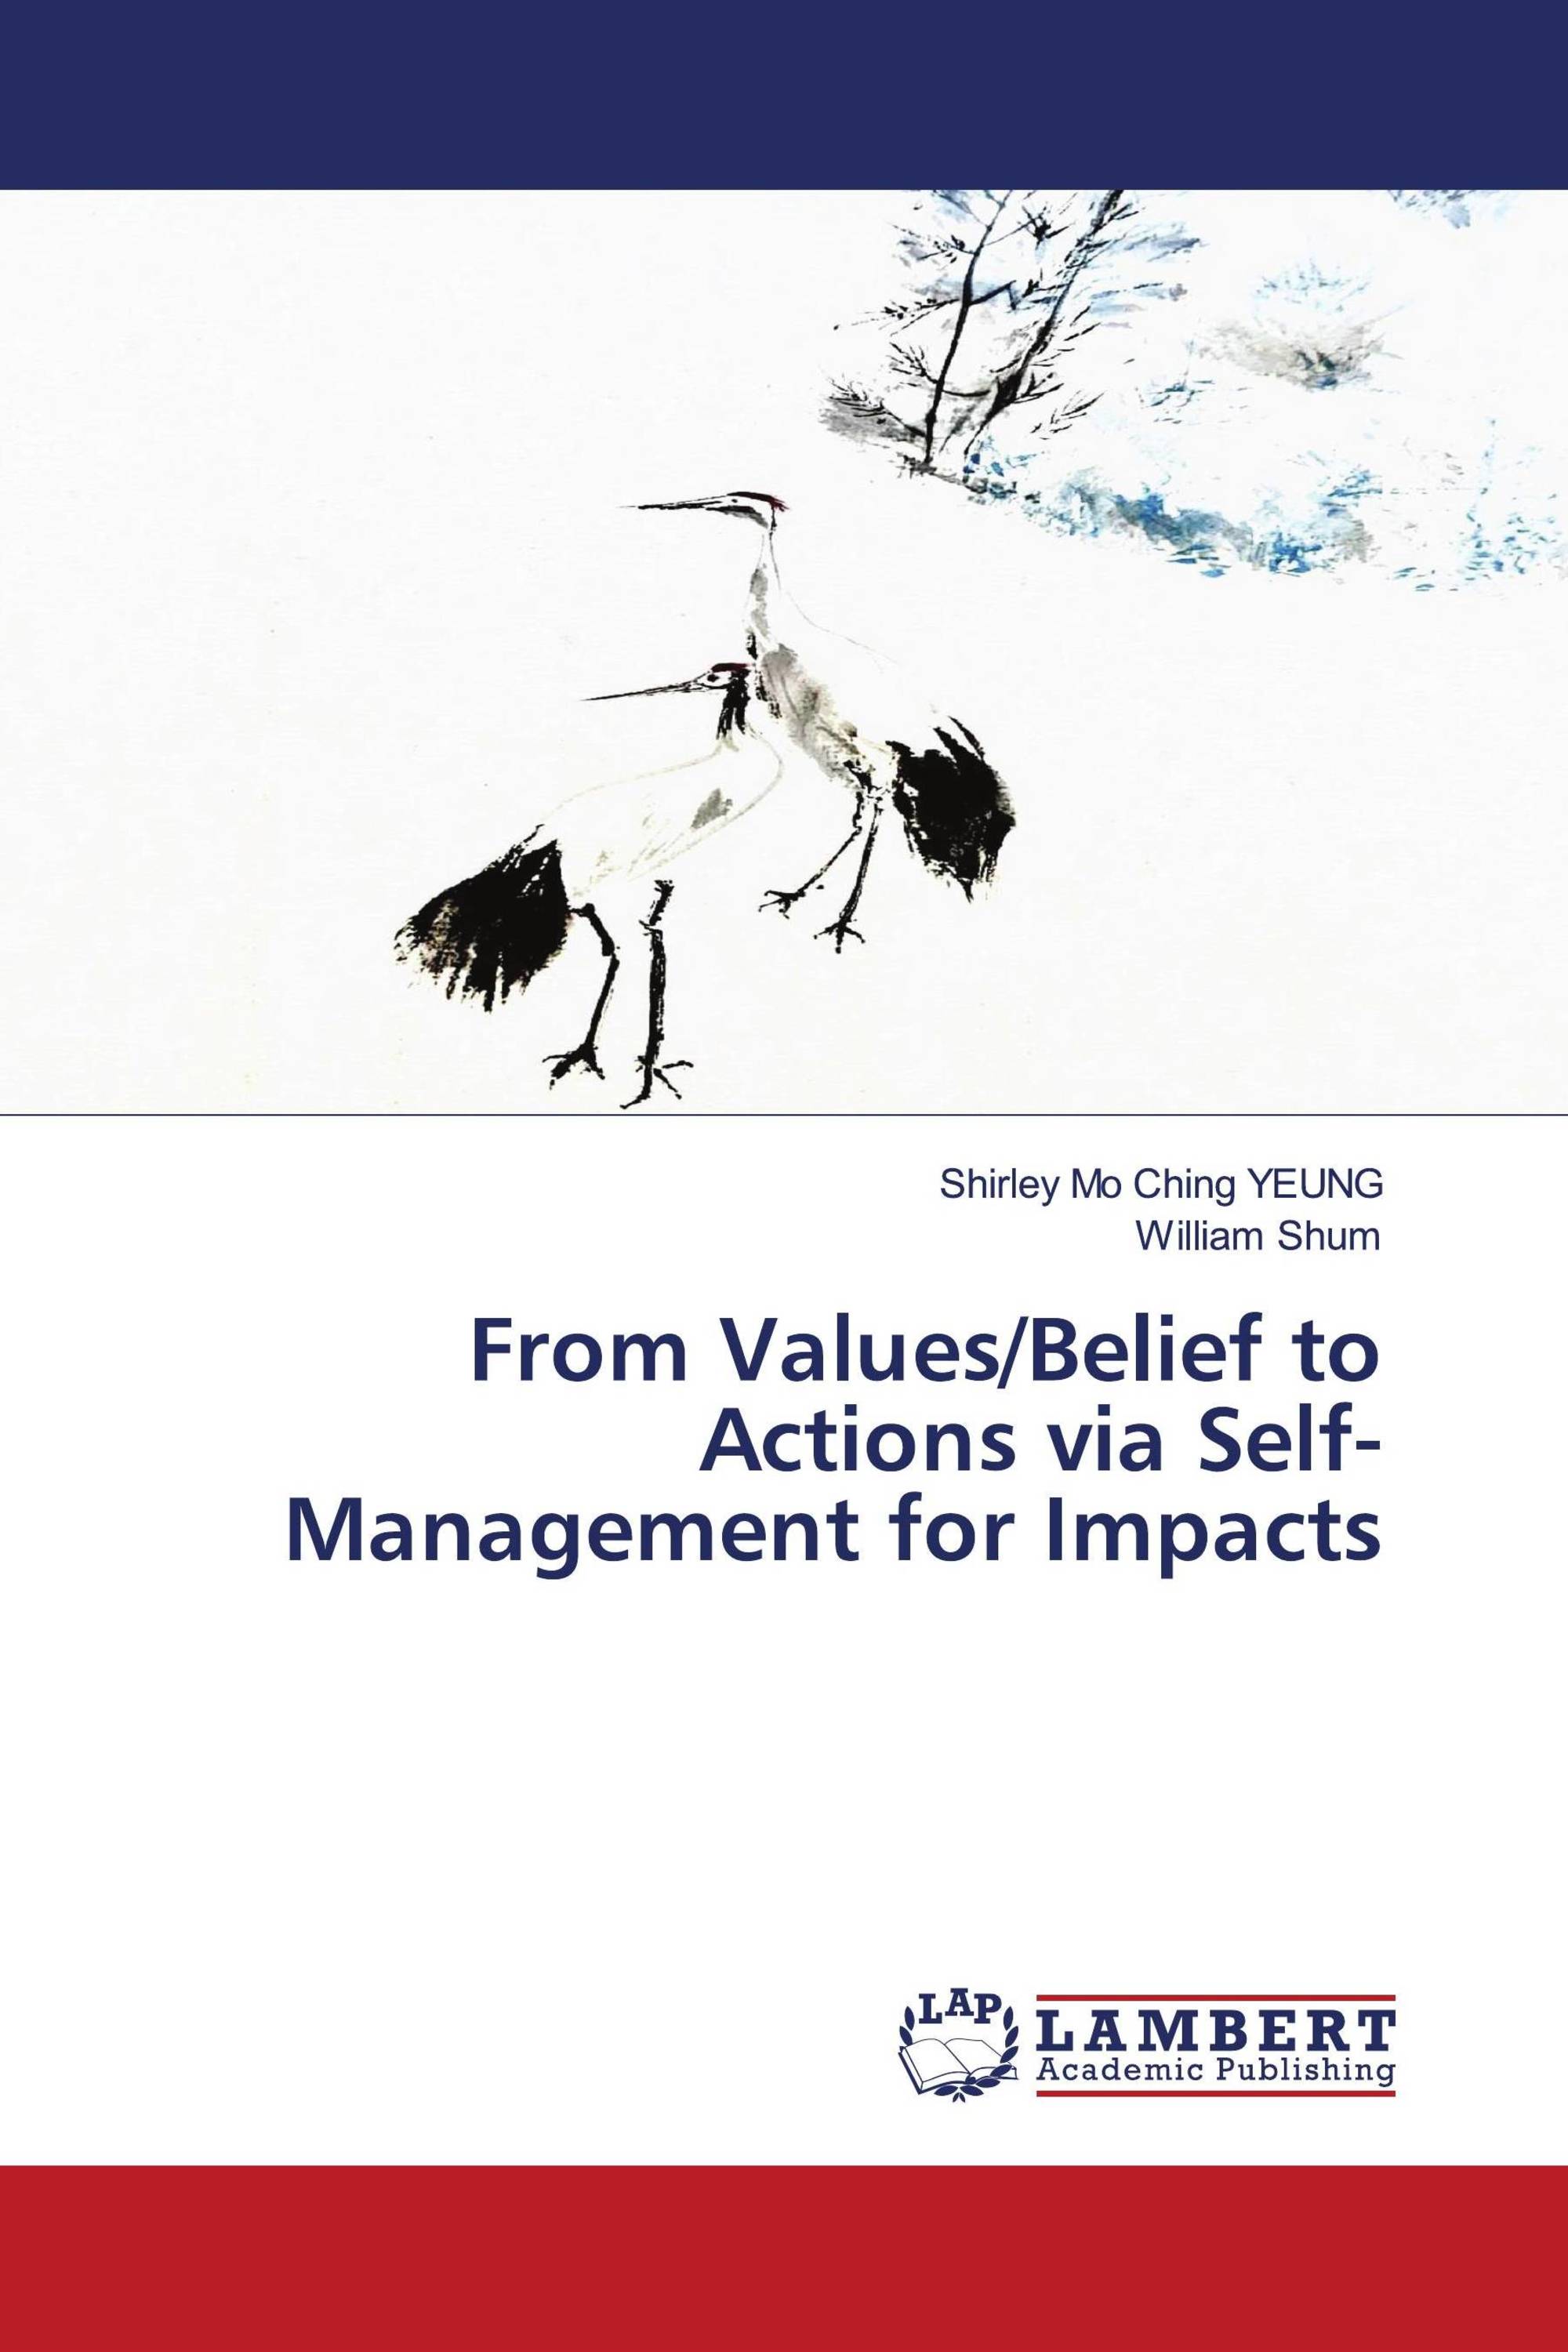 From Values/Belief to Actions via Self-Management for Impacts